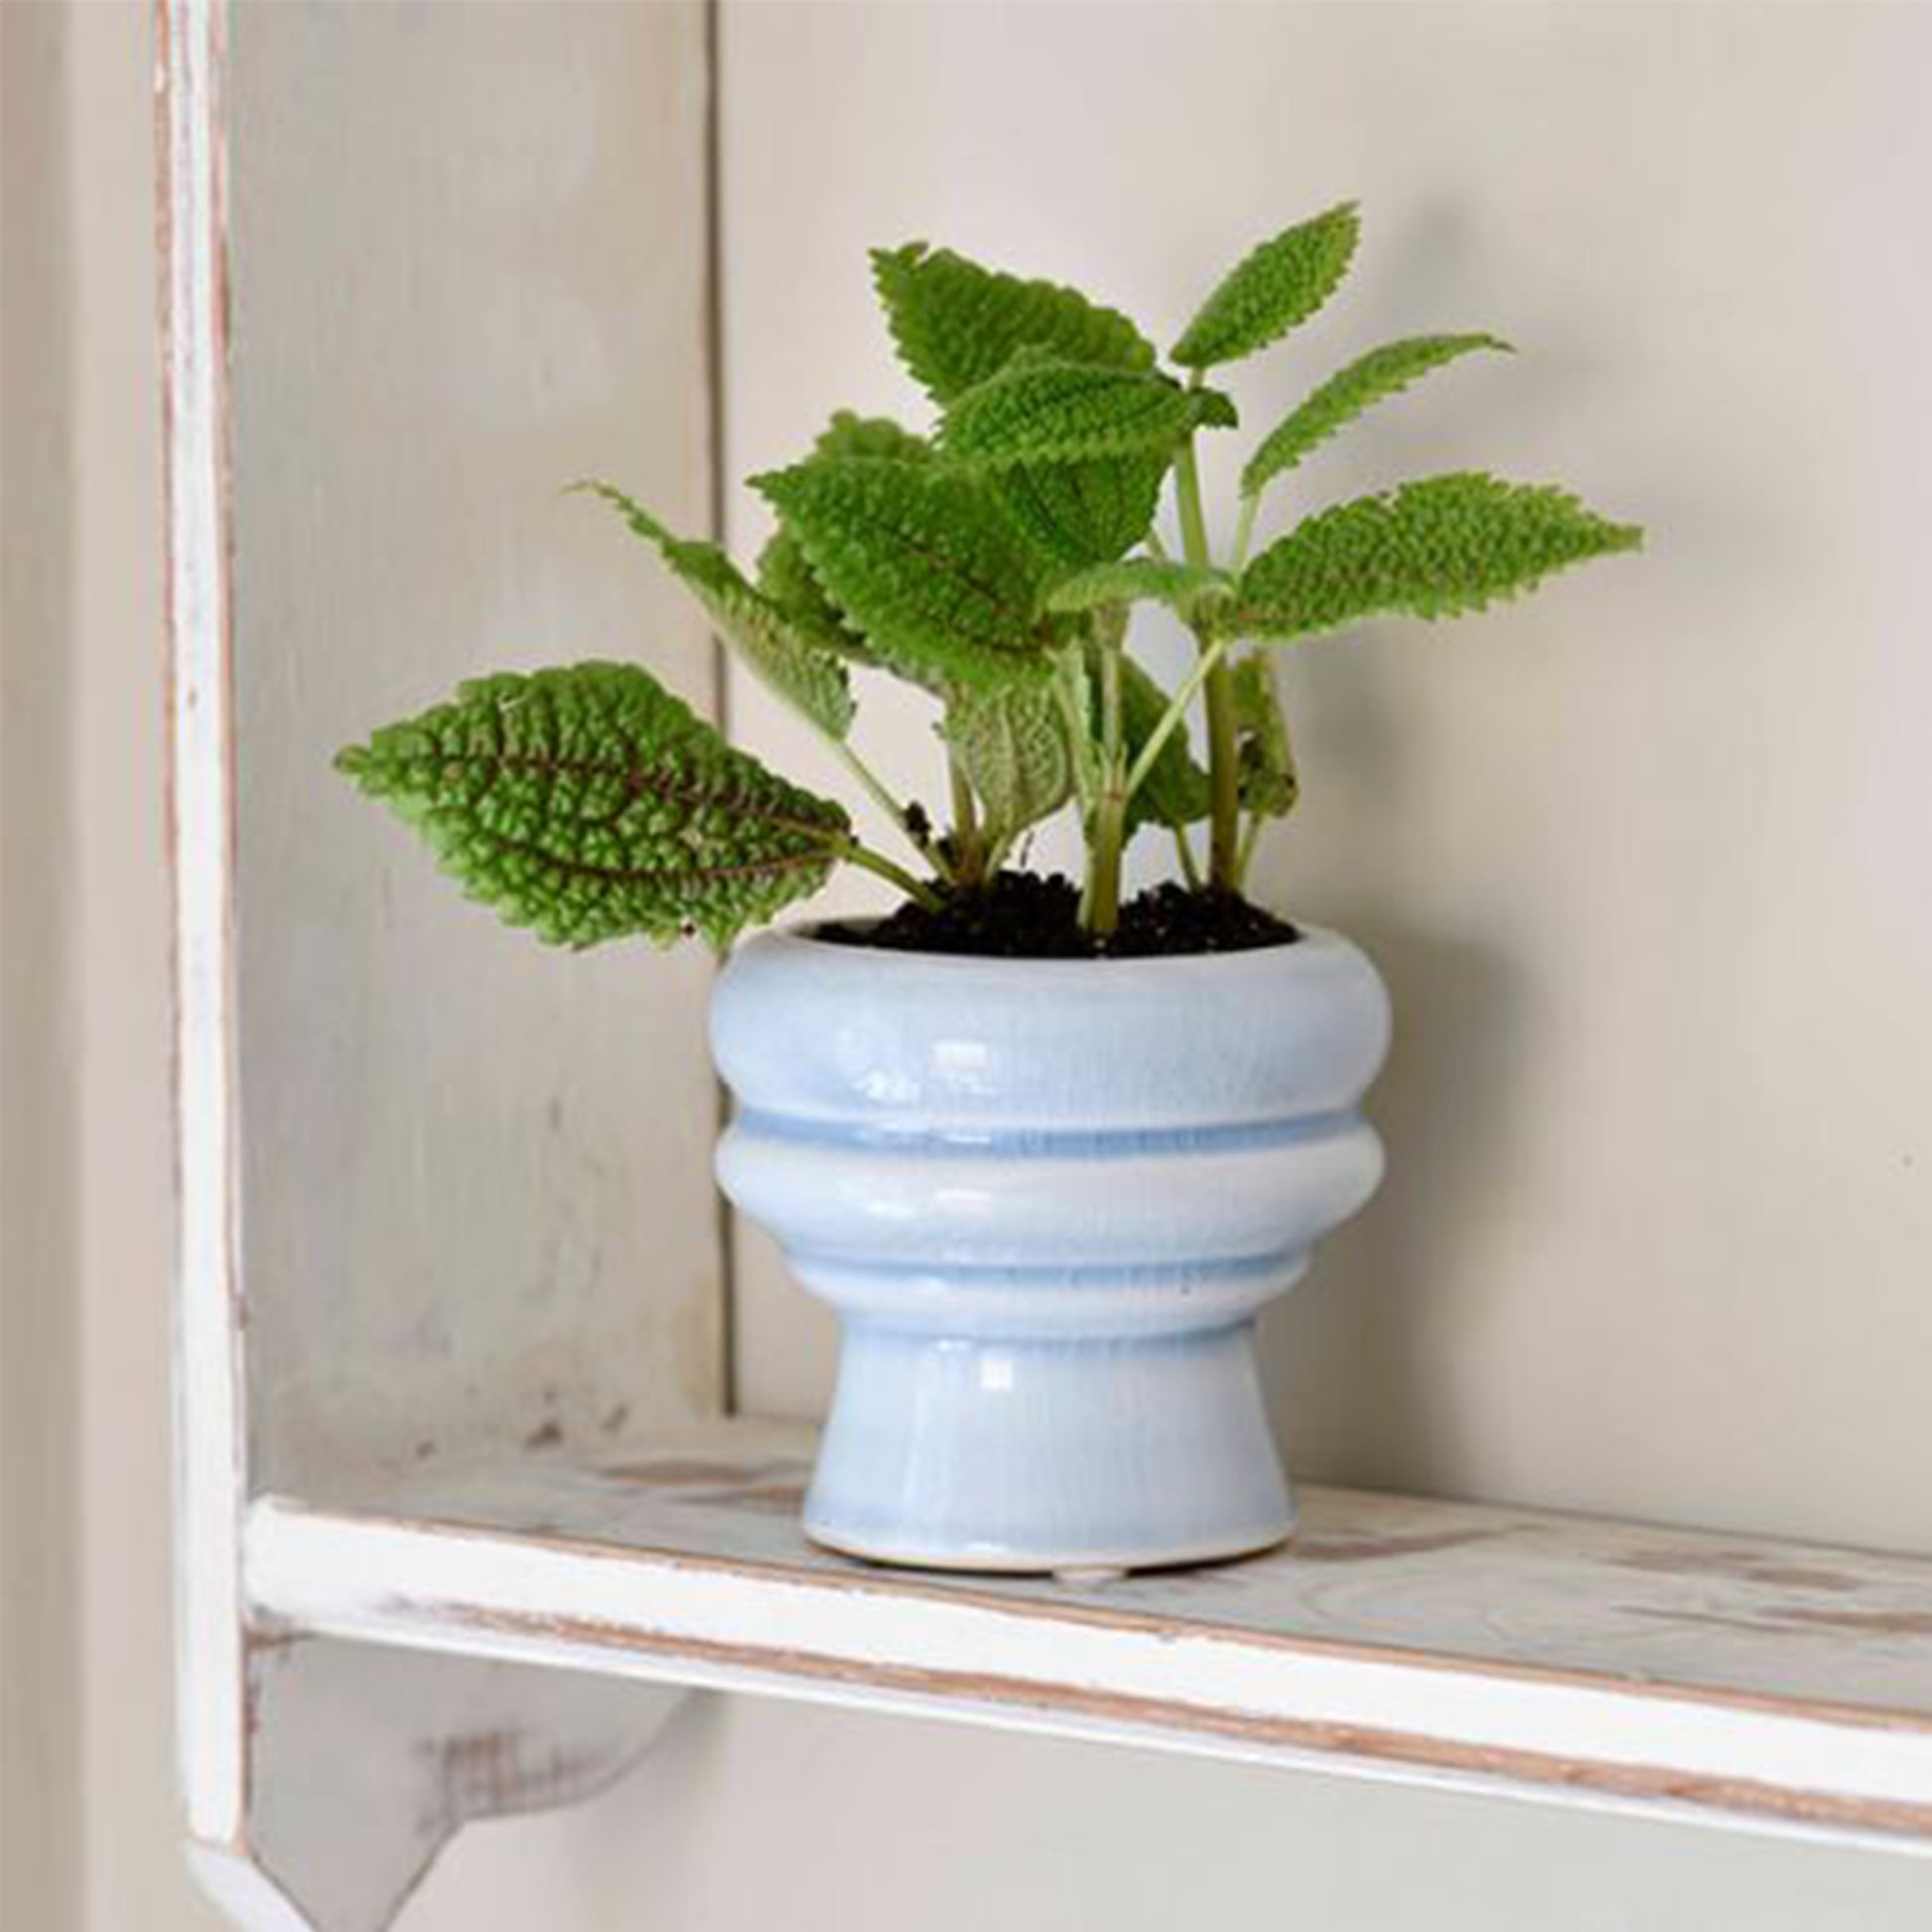 the pot on a rustic white shelf housing some mint